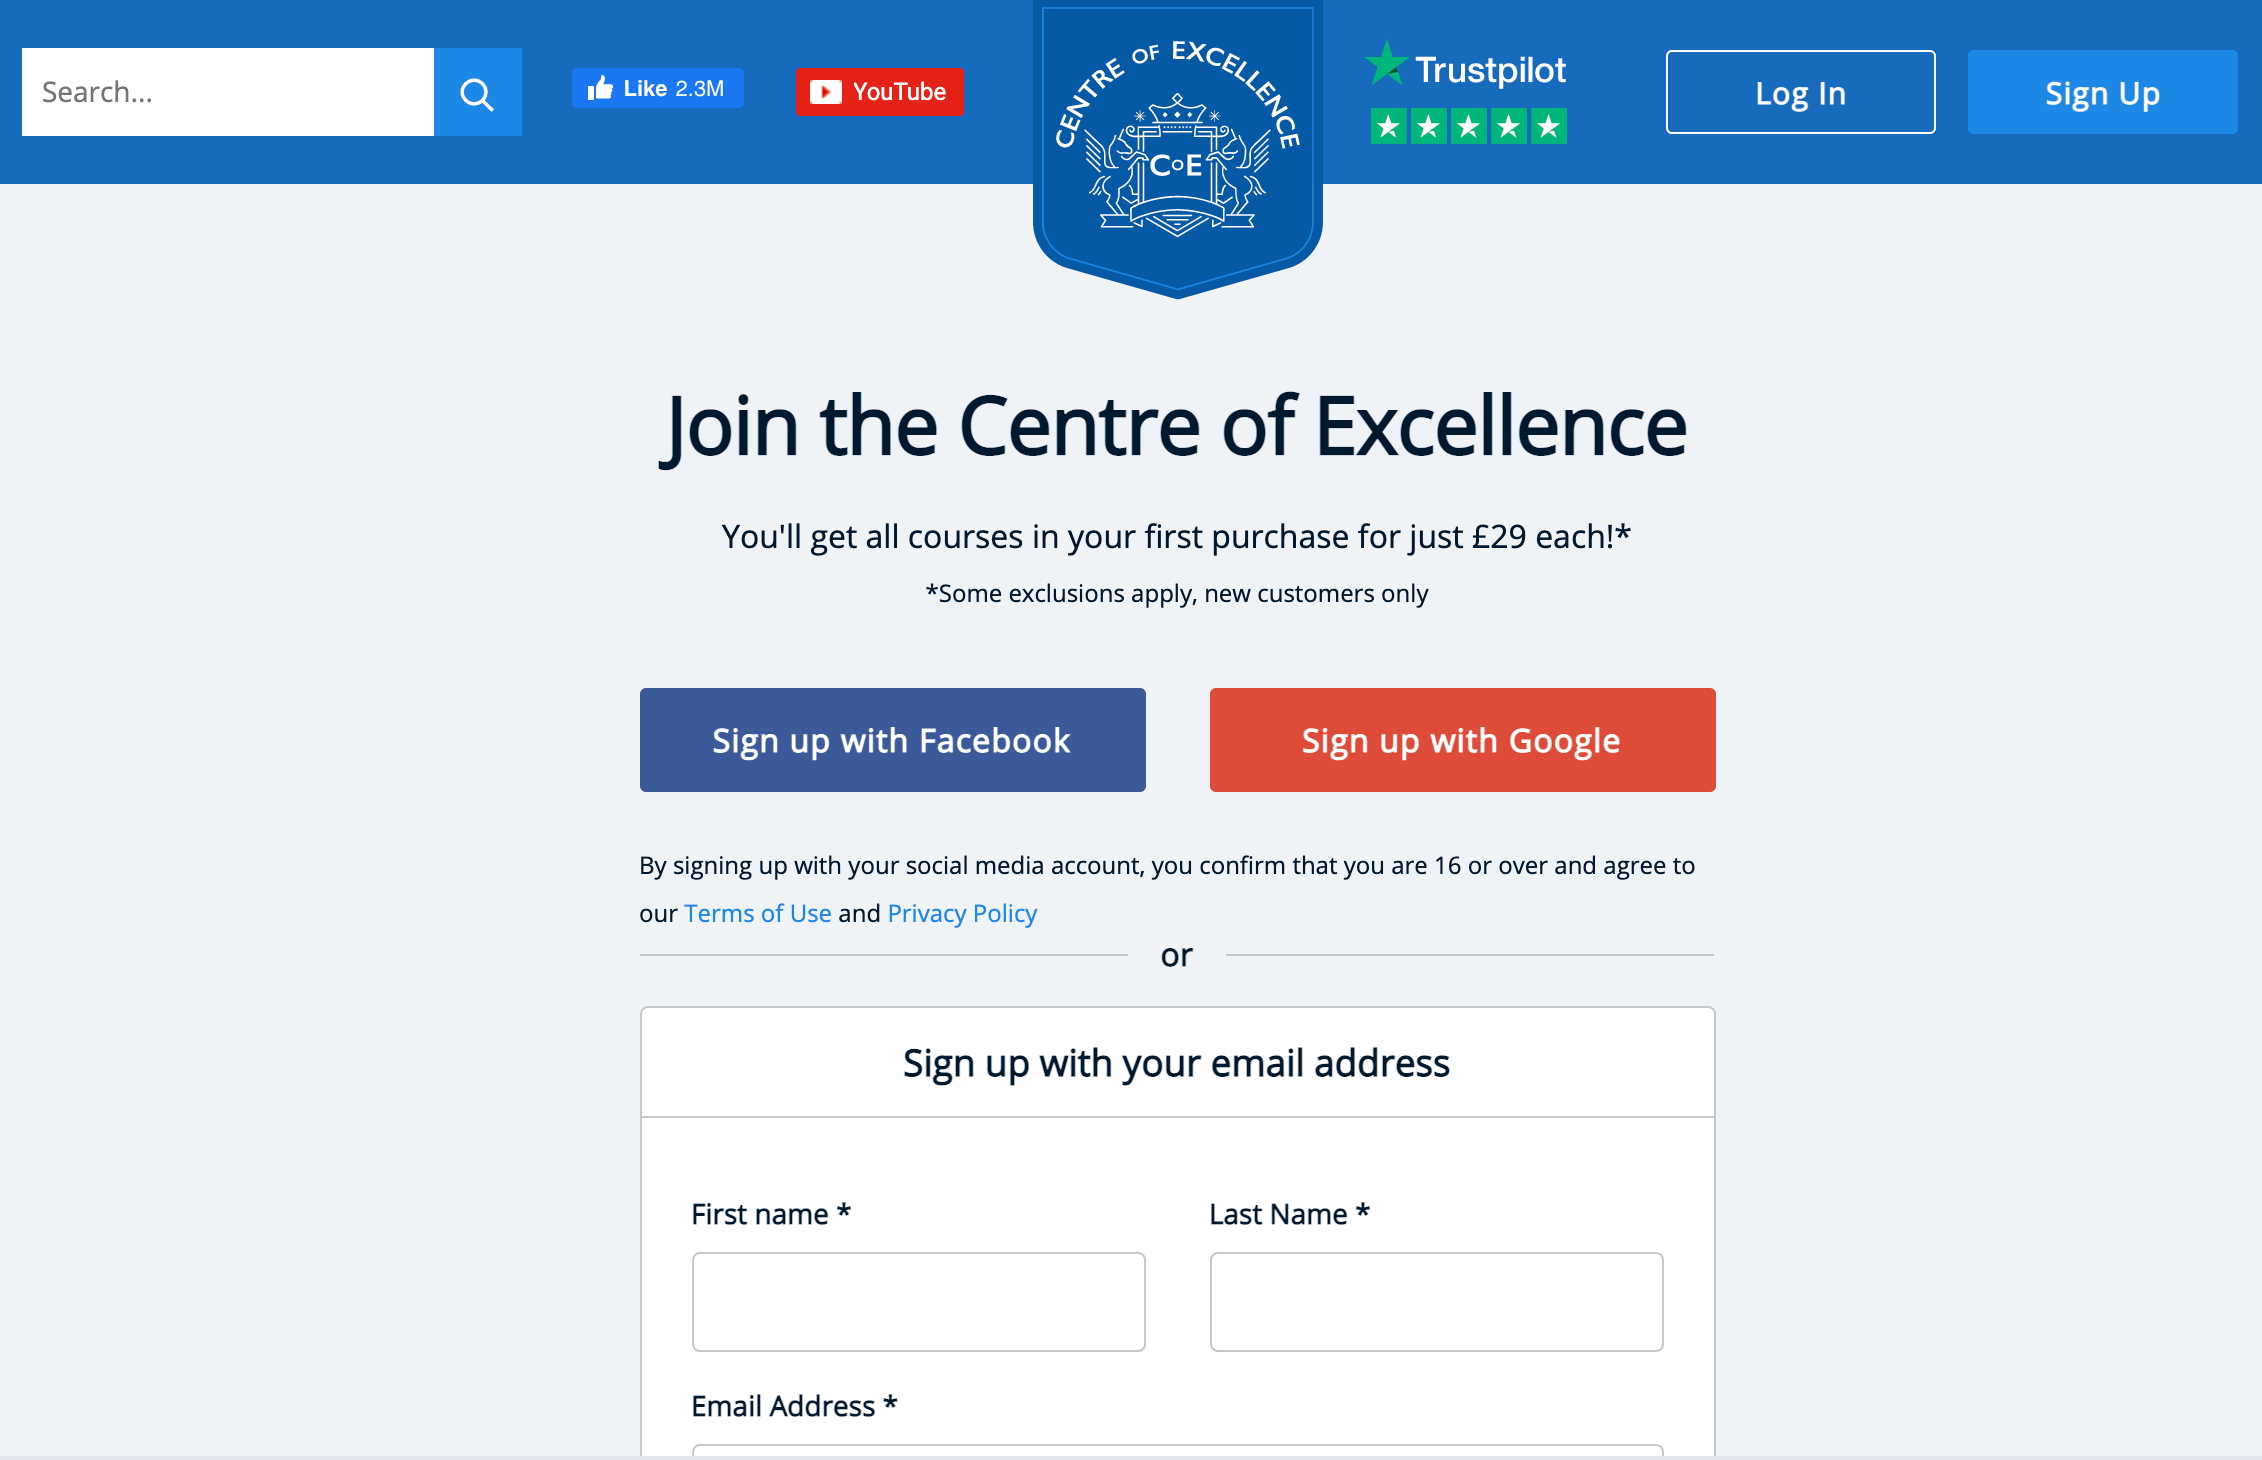 Centre of excellence referral code, £29 offer discounted first course